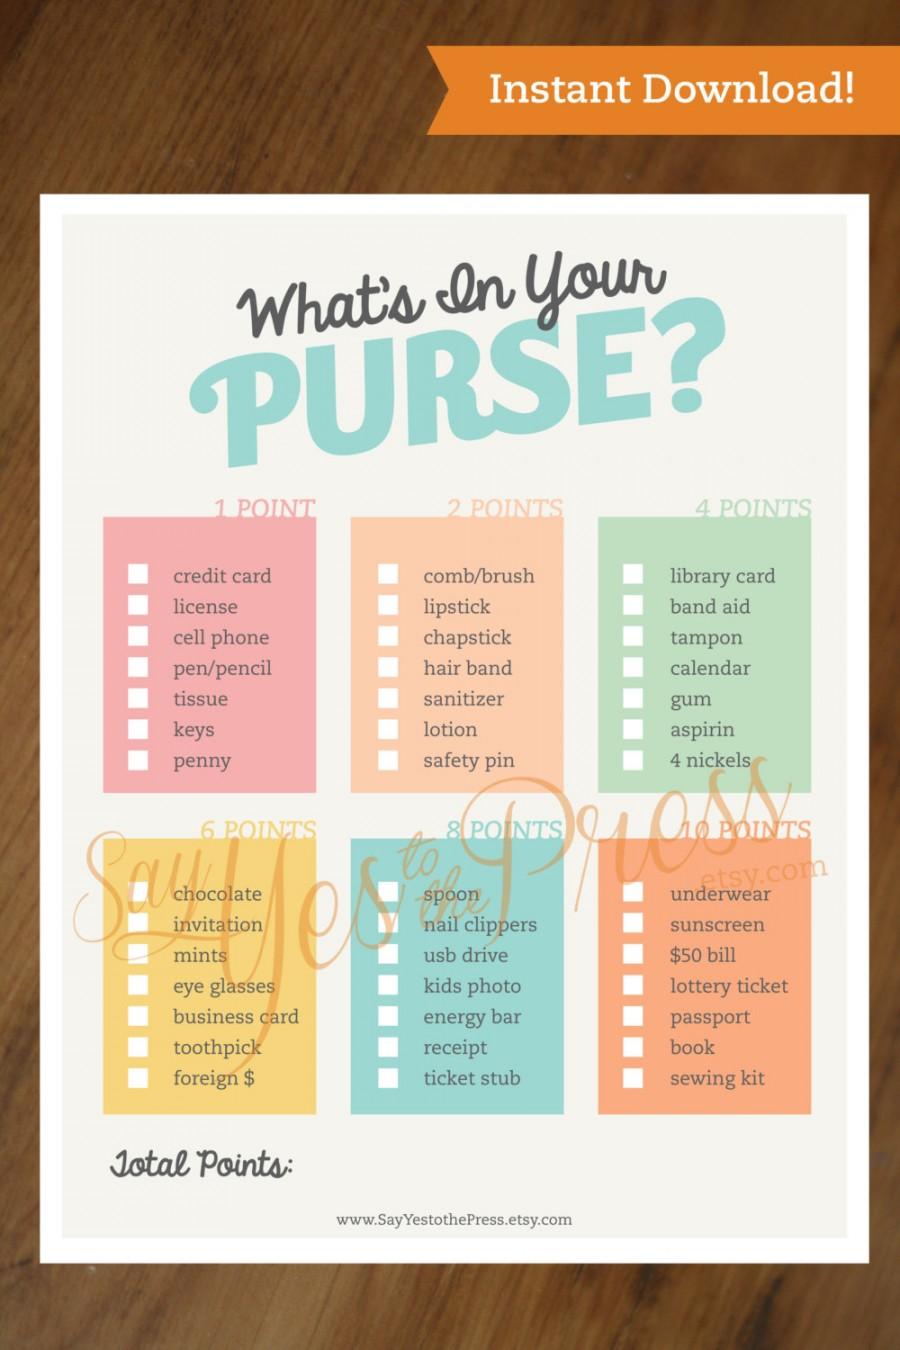 Hochzeit - WHATS in YOUR PURSE? Instant Download Bridal Shower Game